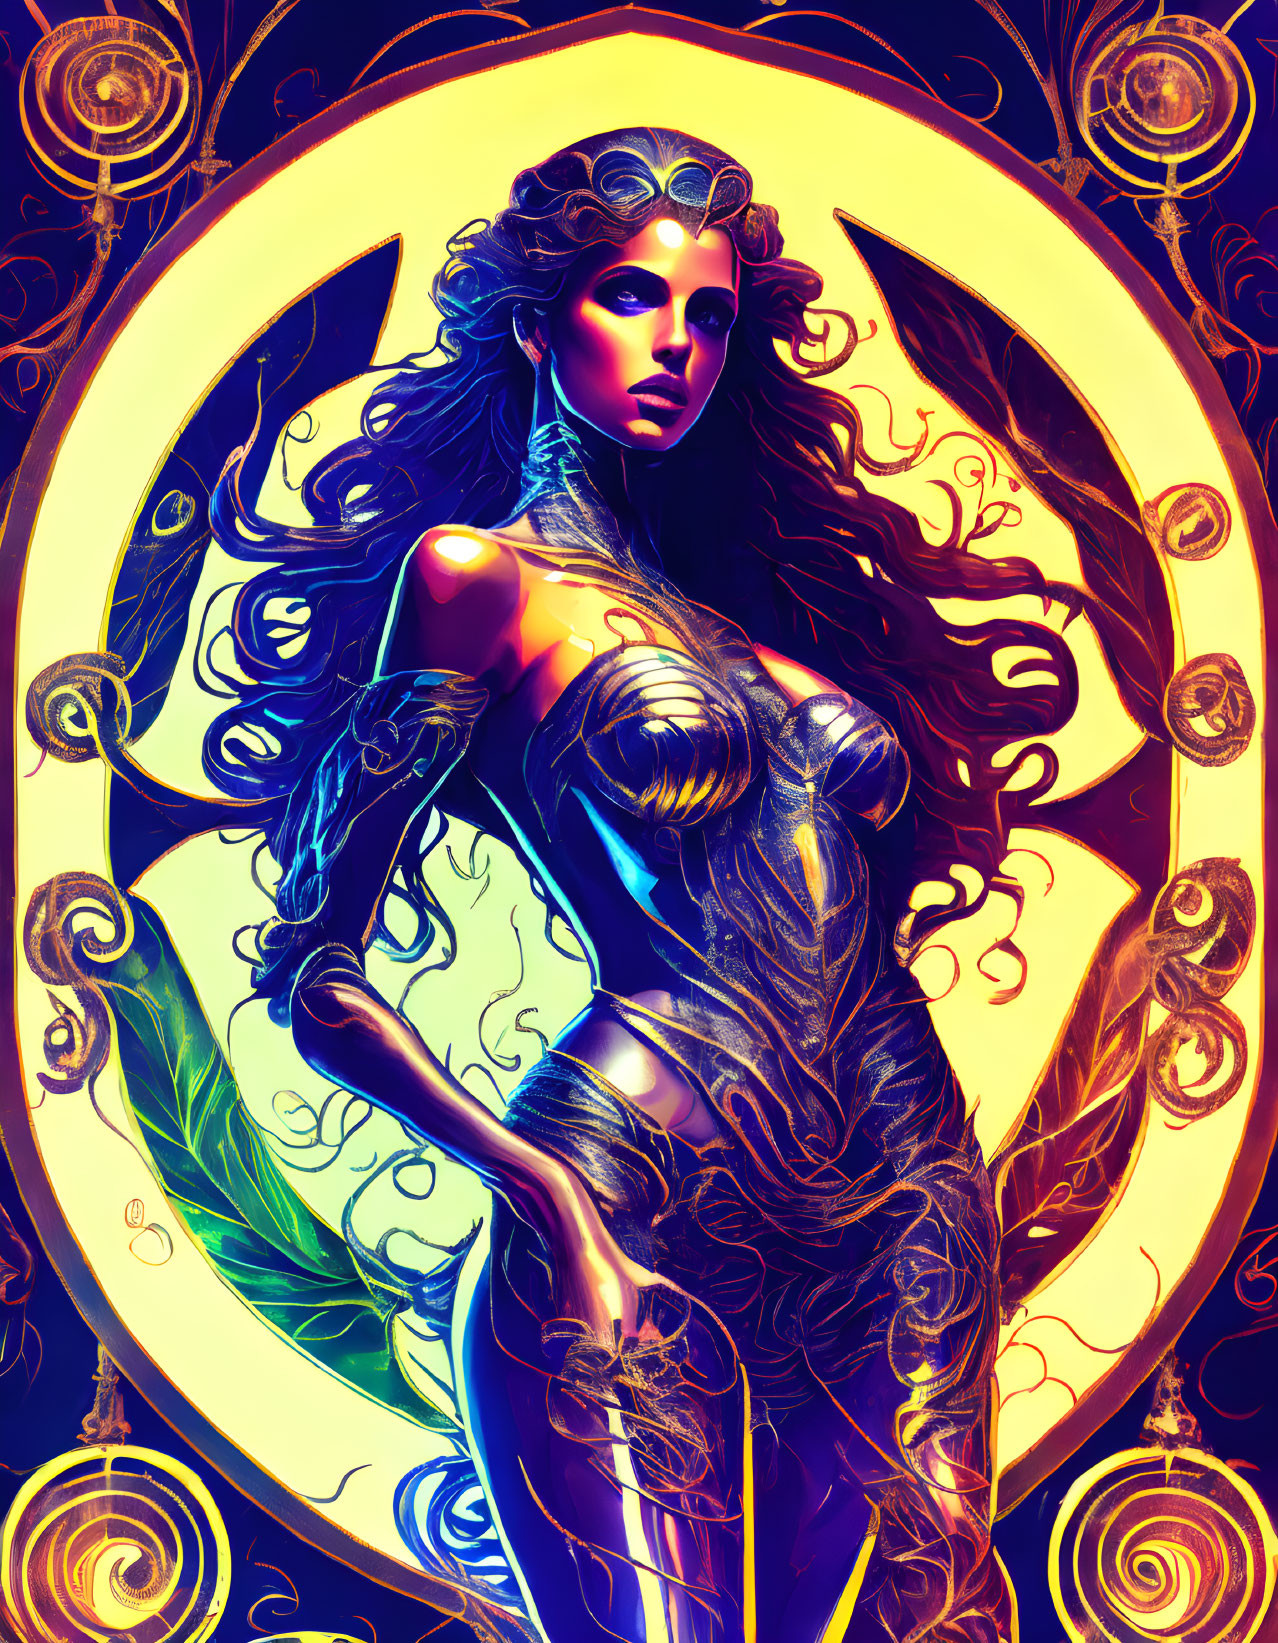 Colorful Woman Illustration with Flowing Hair and Ornate Body Designs Standing on Crescent Moon